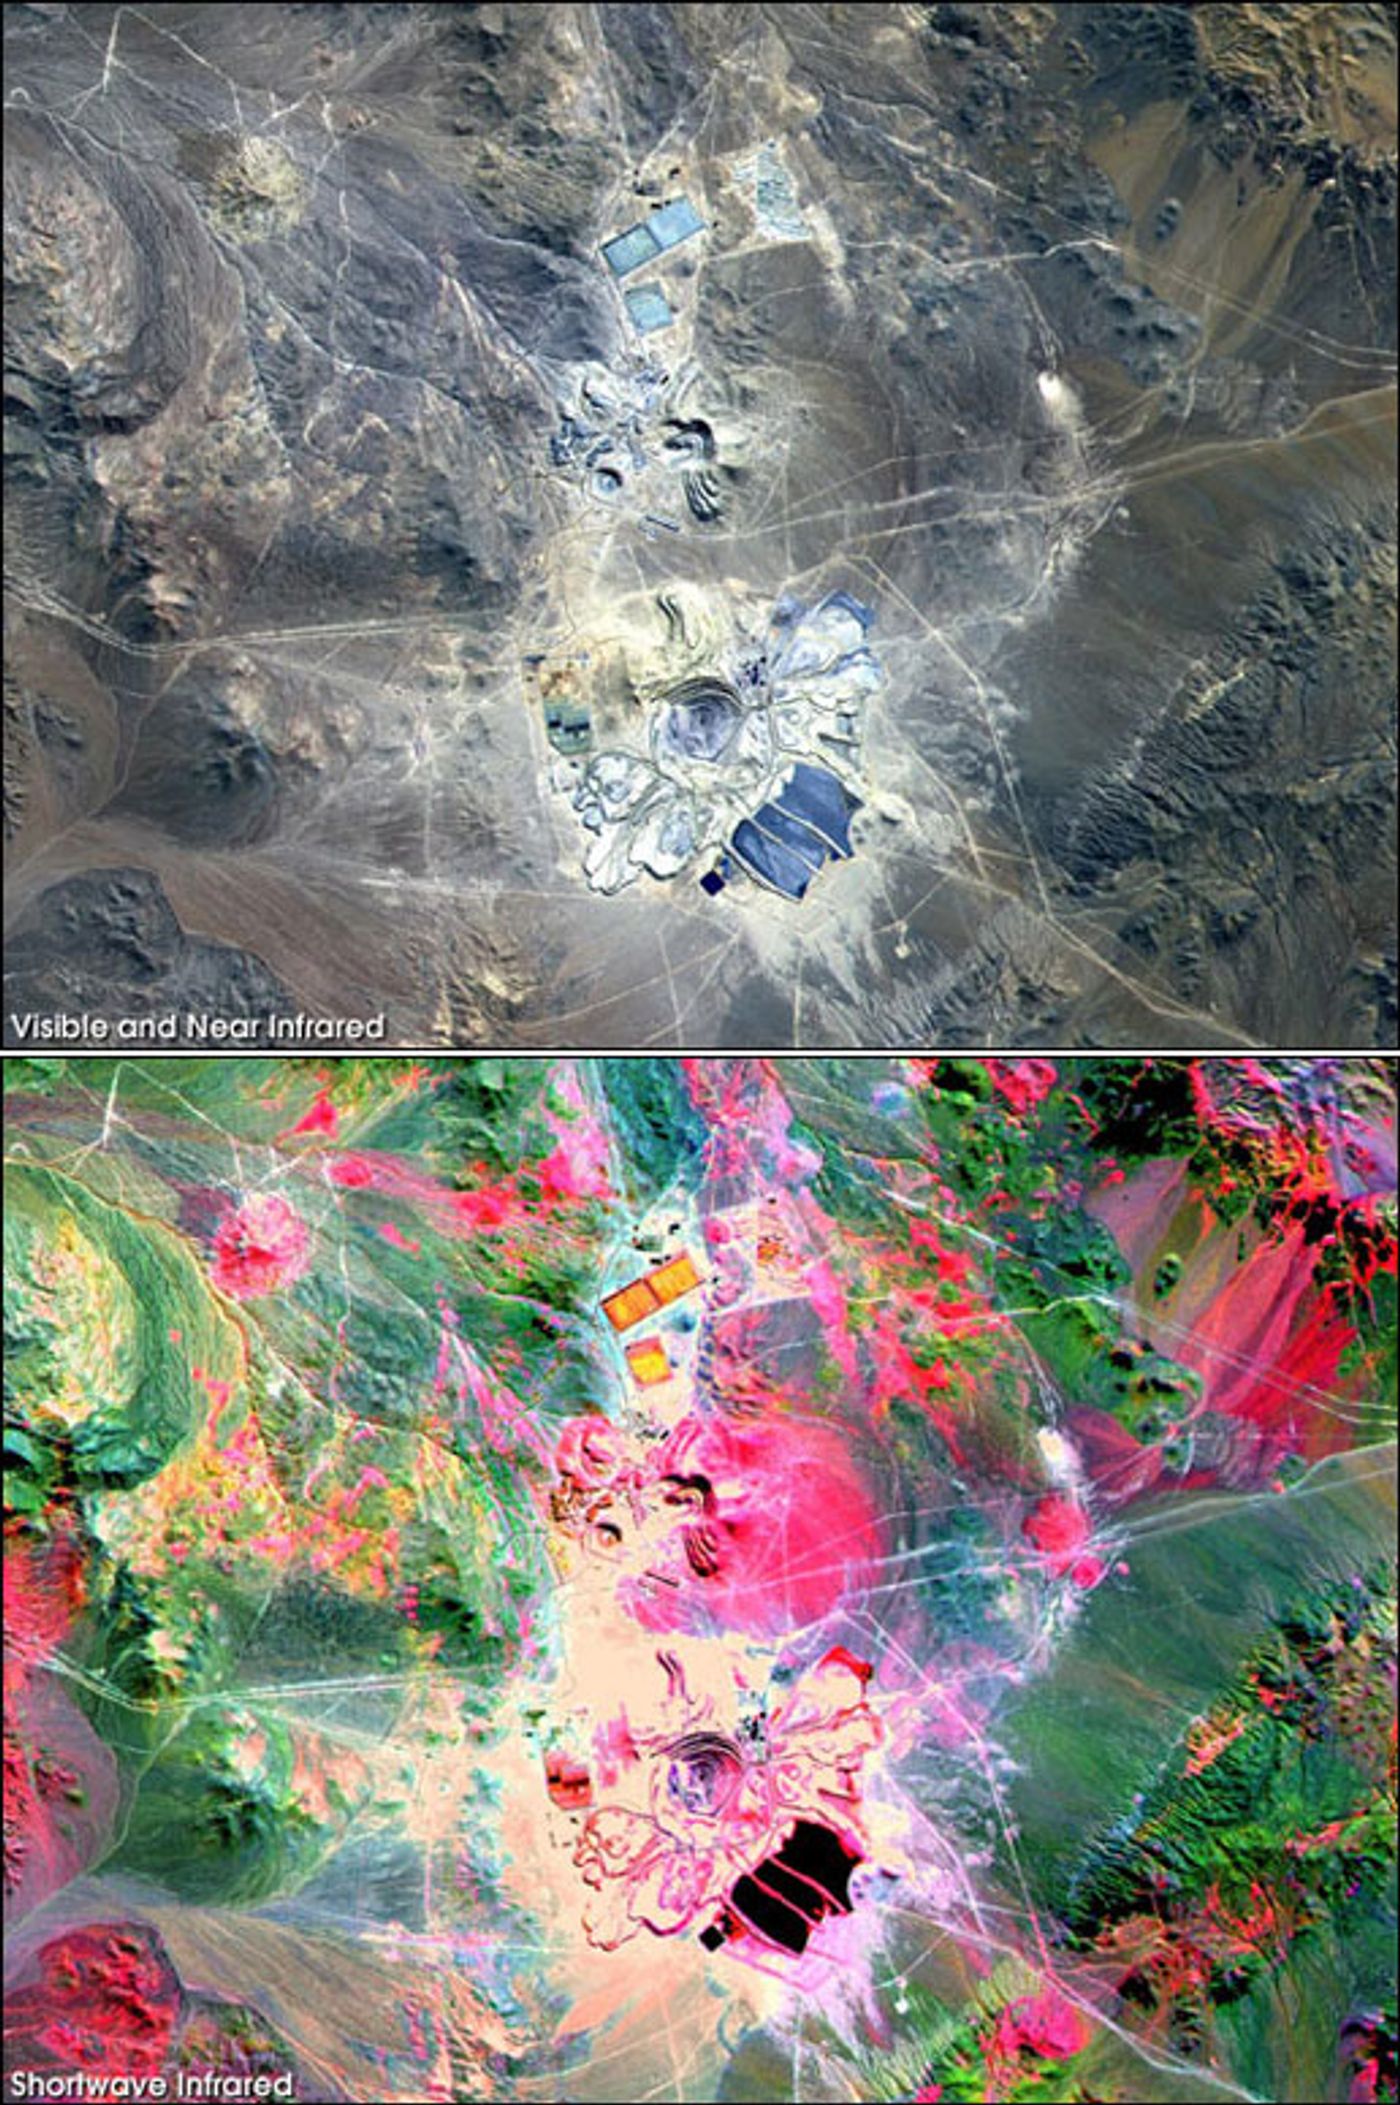 Two versions of the same image of the Escondido Mine in Chile